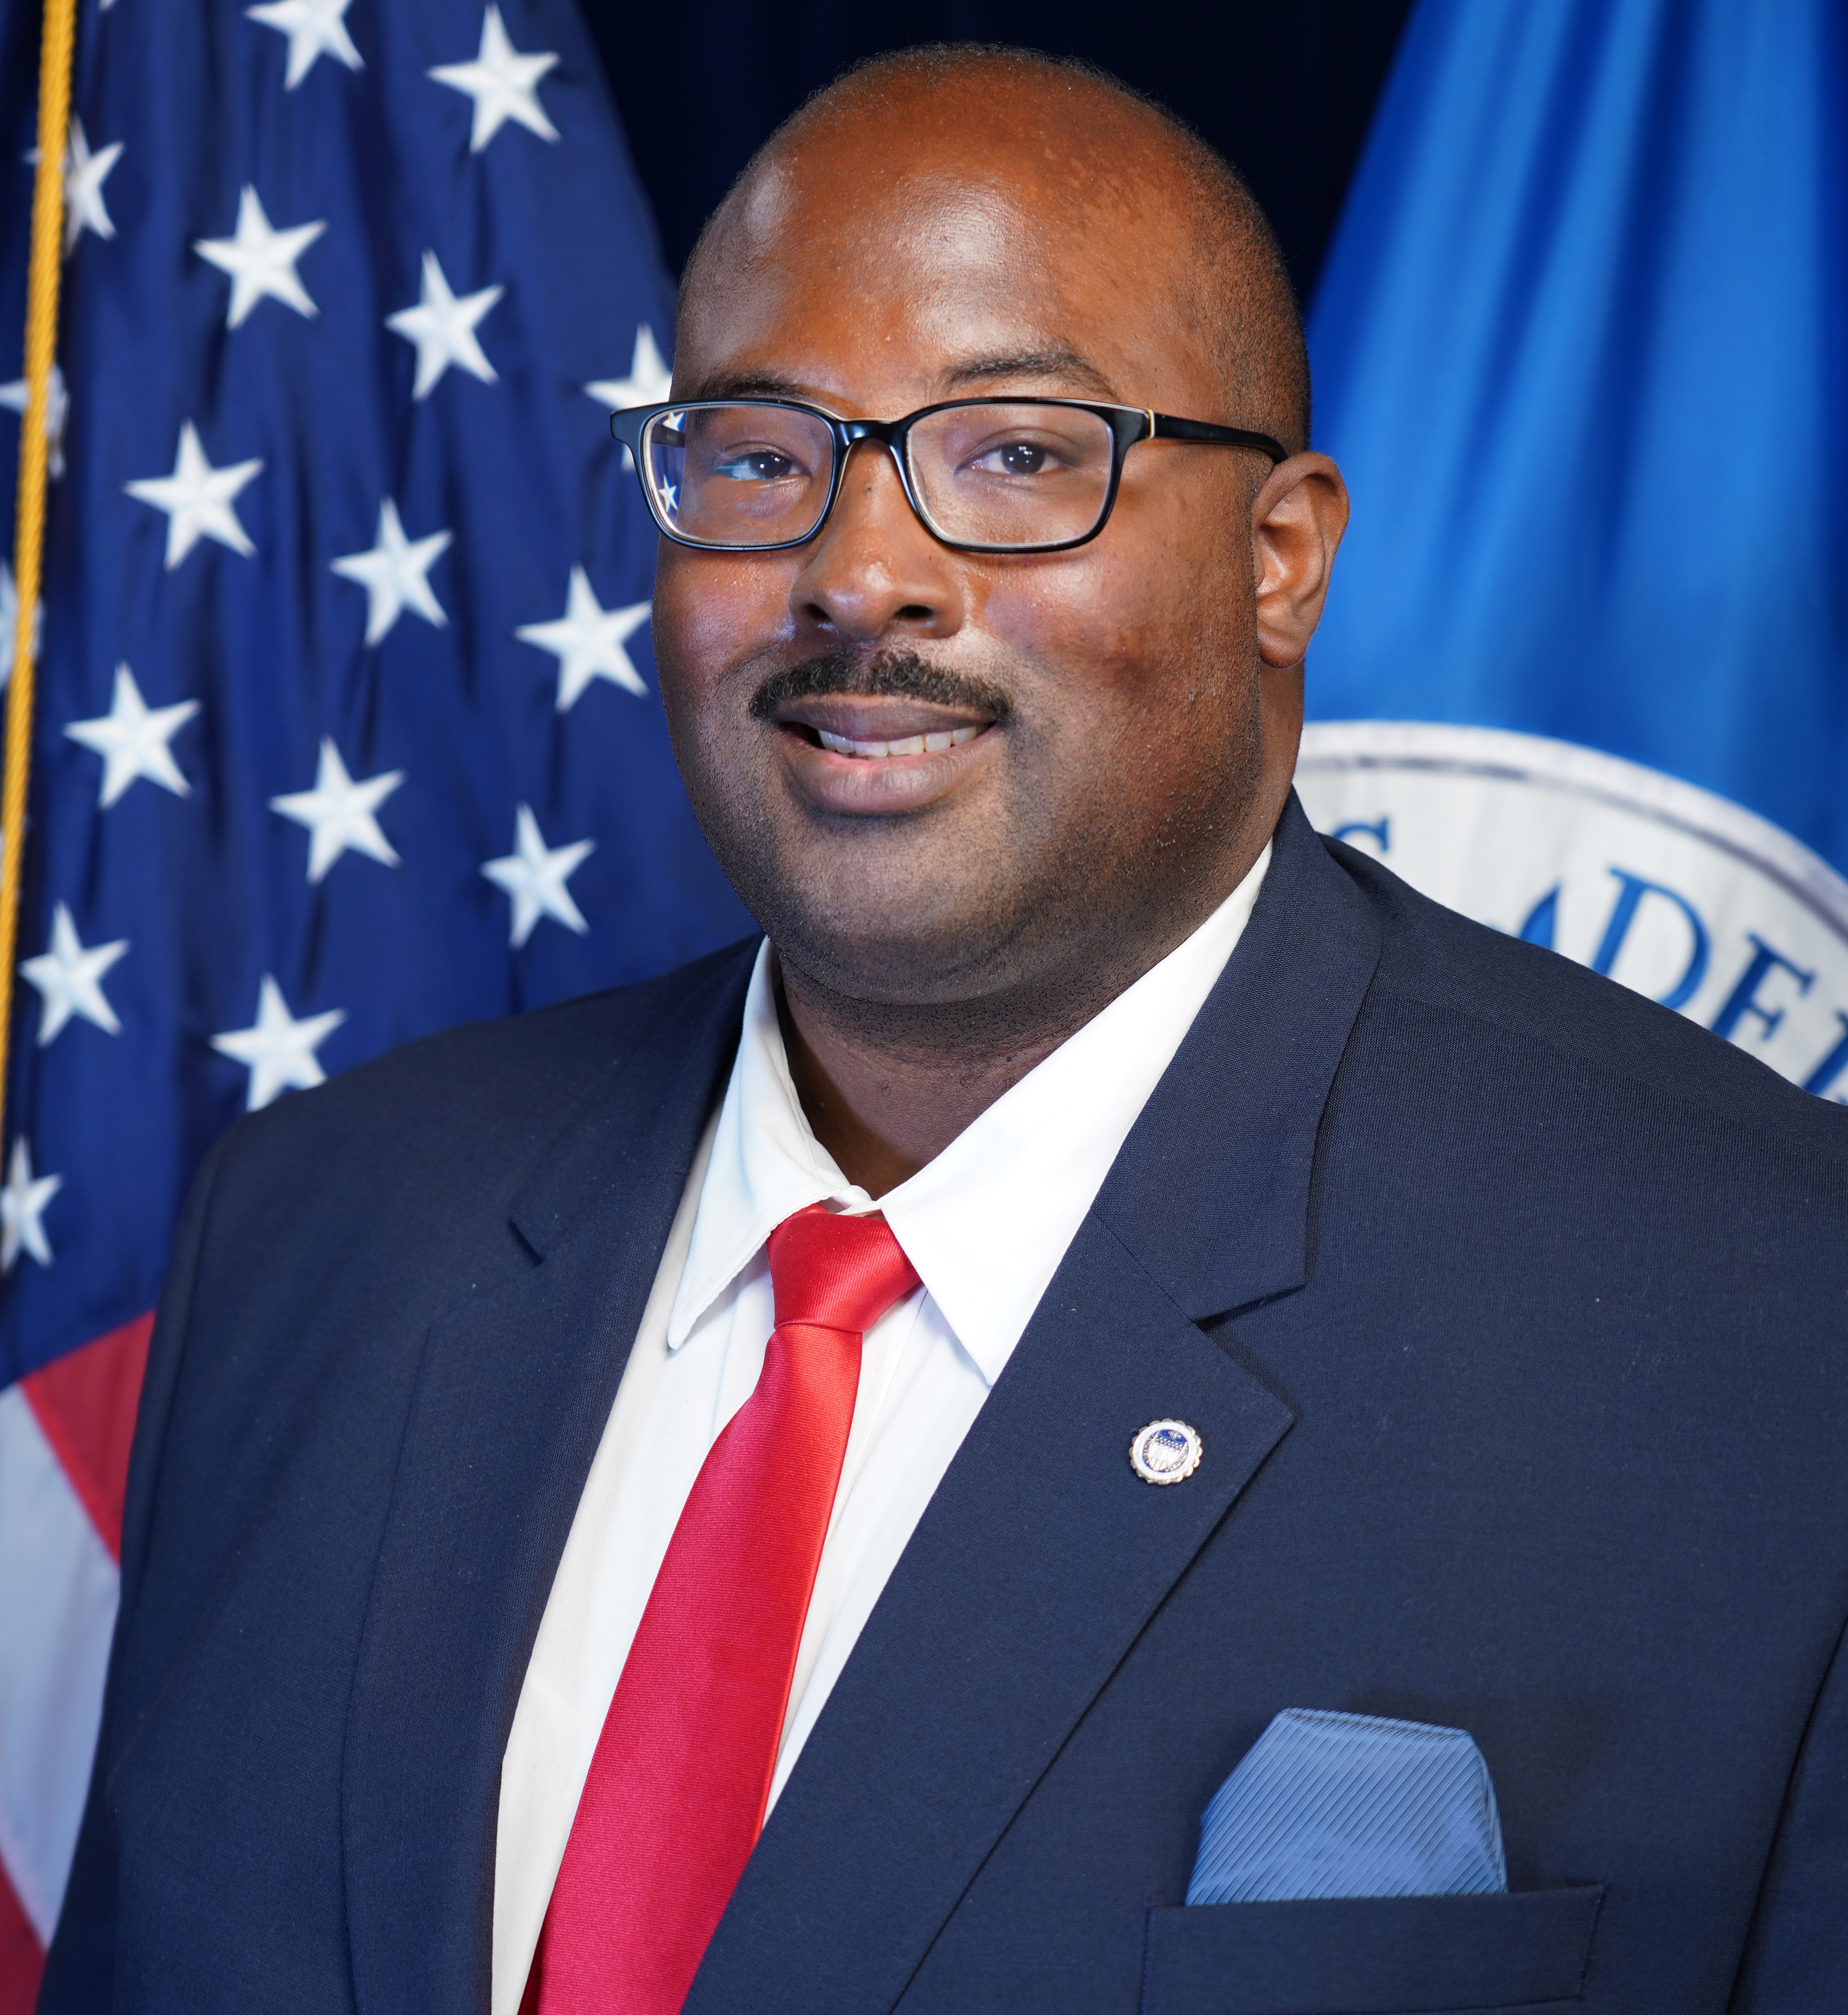 A African American Make with a blue suit on, red tie, white shirt and glasses while standing in front of the American flag and DHS flag